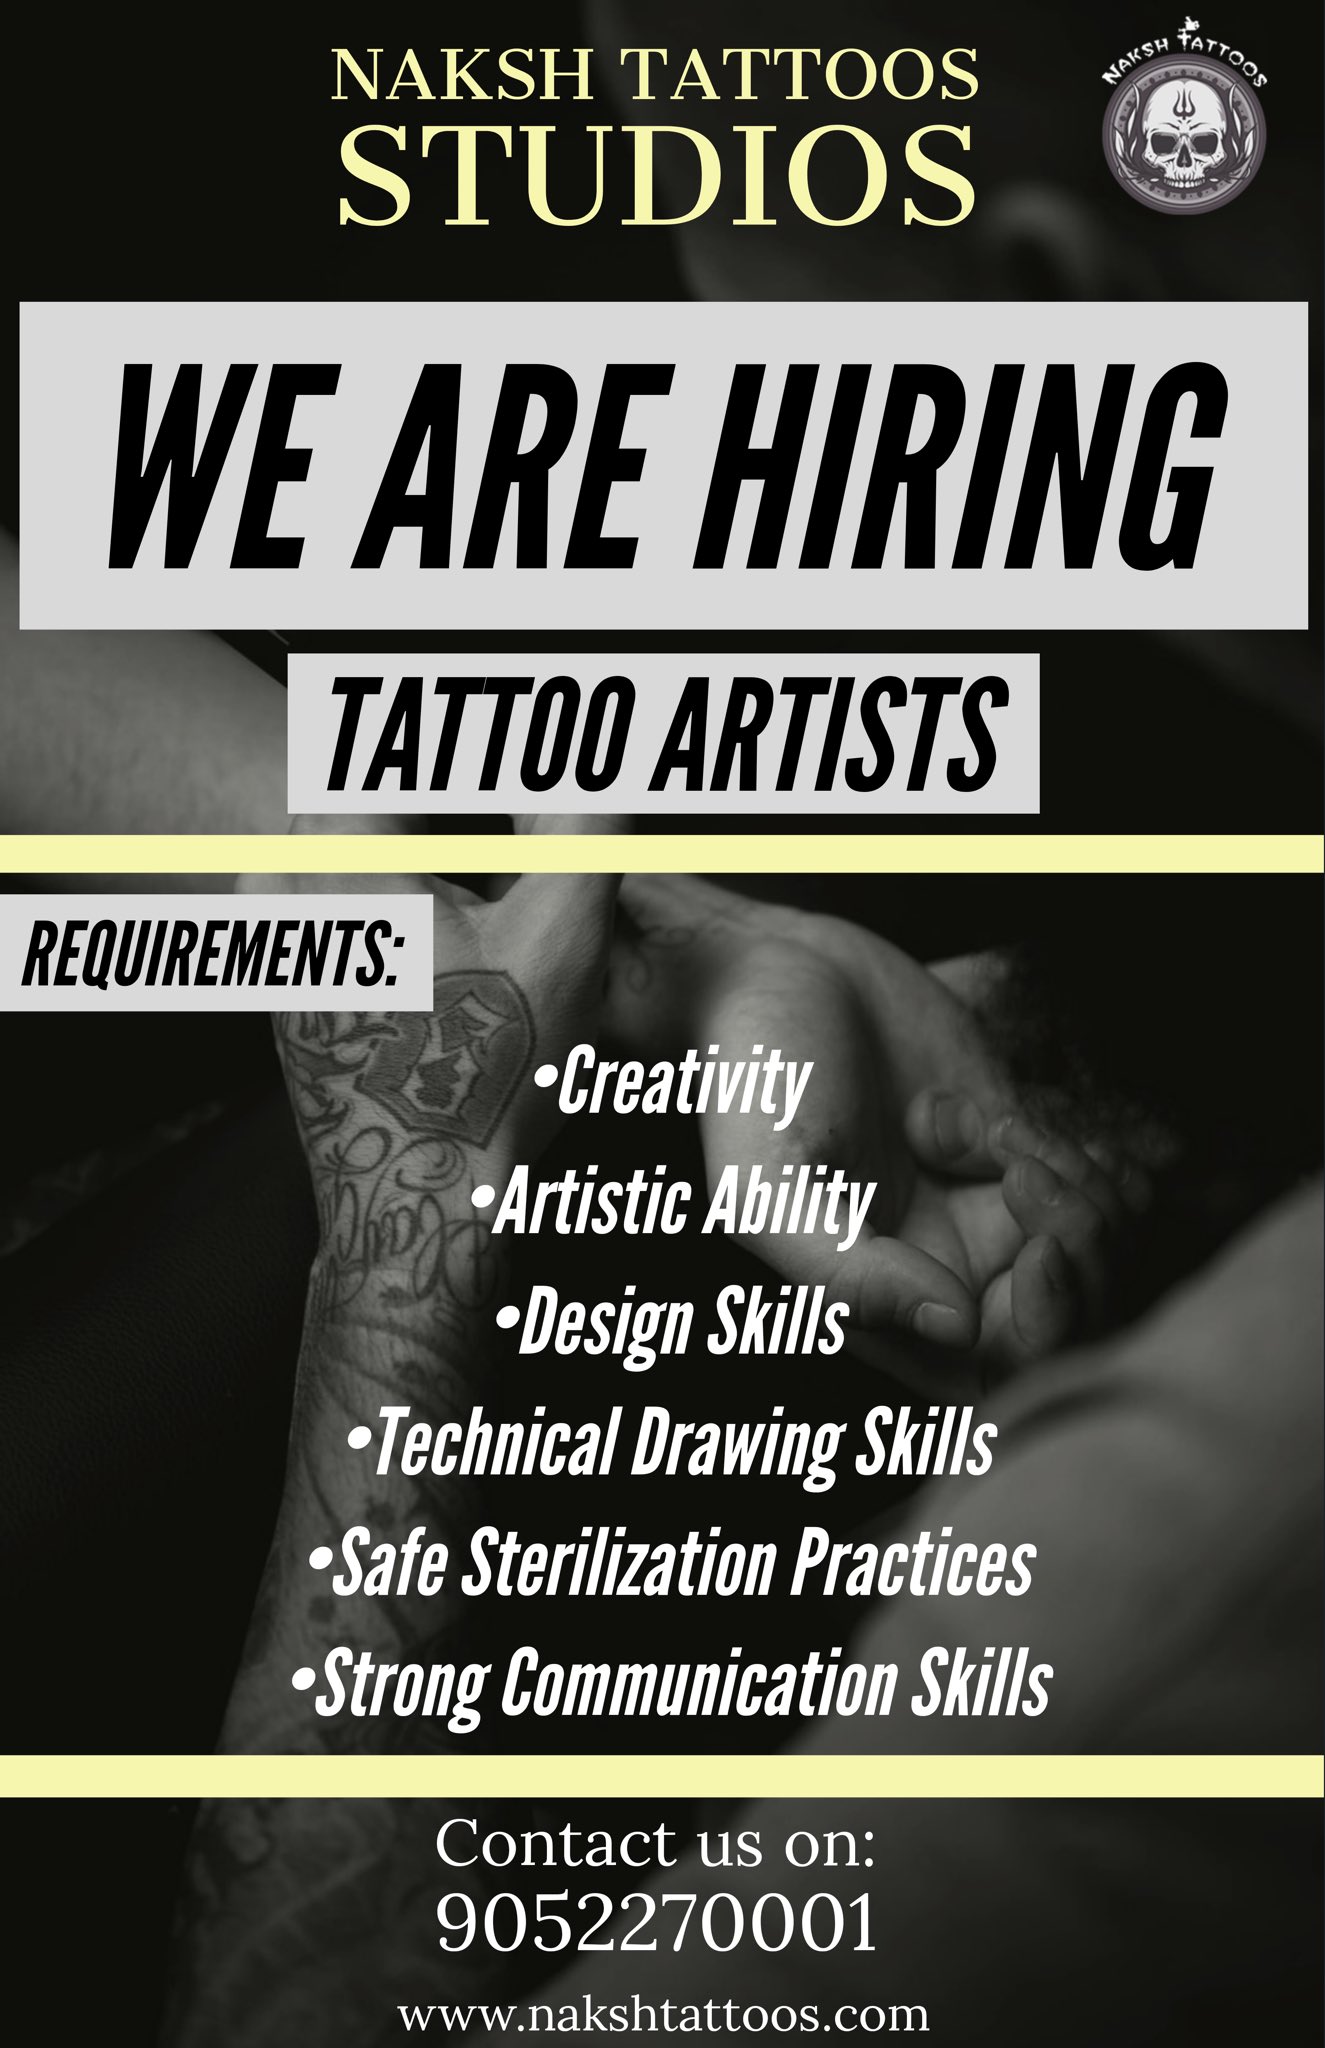 Red Buddha Tattoo  NOW HIRING TATTOO ARTIST AND ACCEPTING